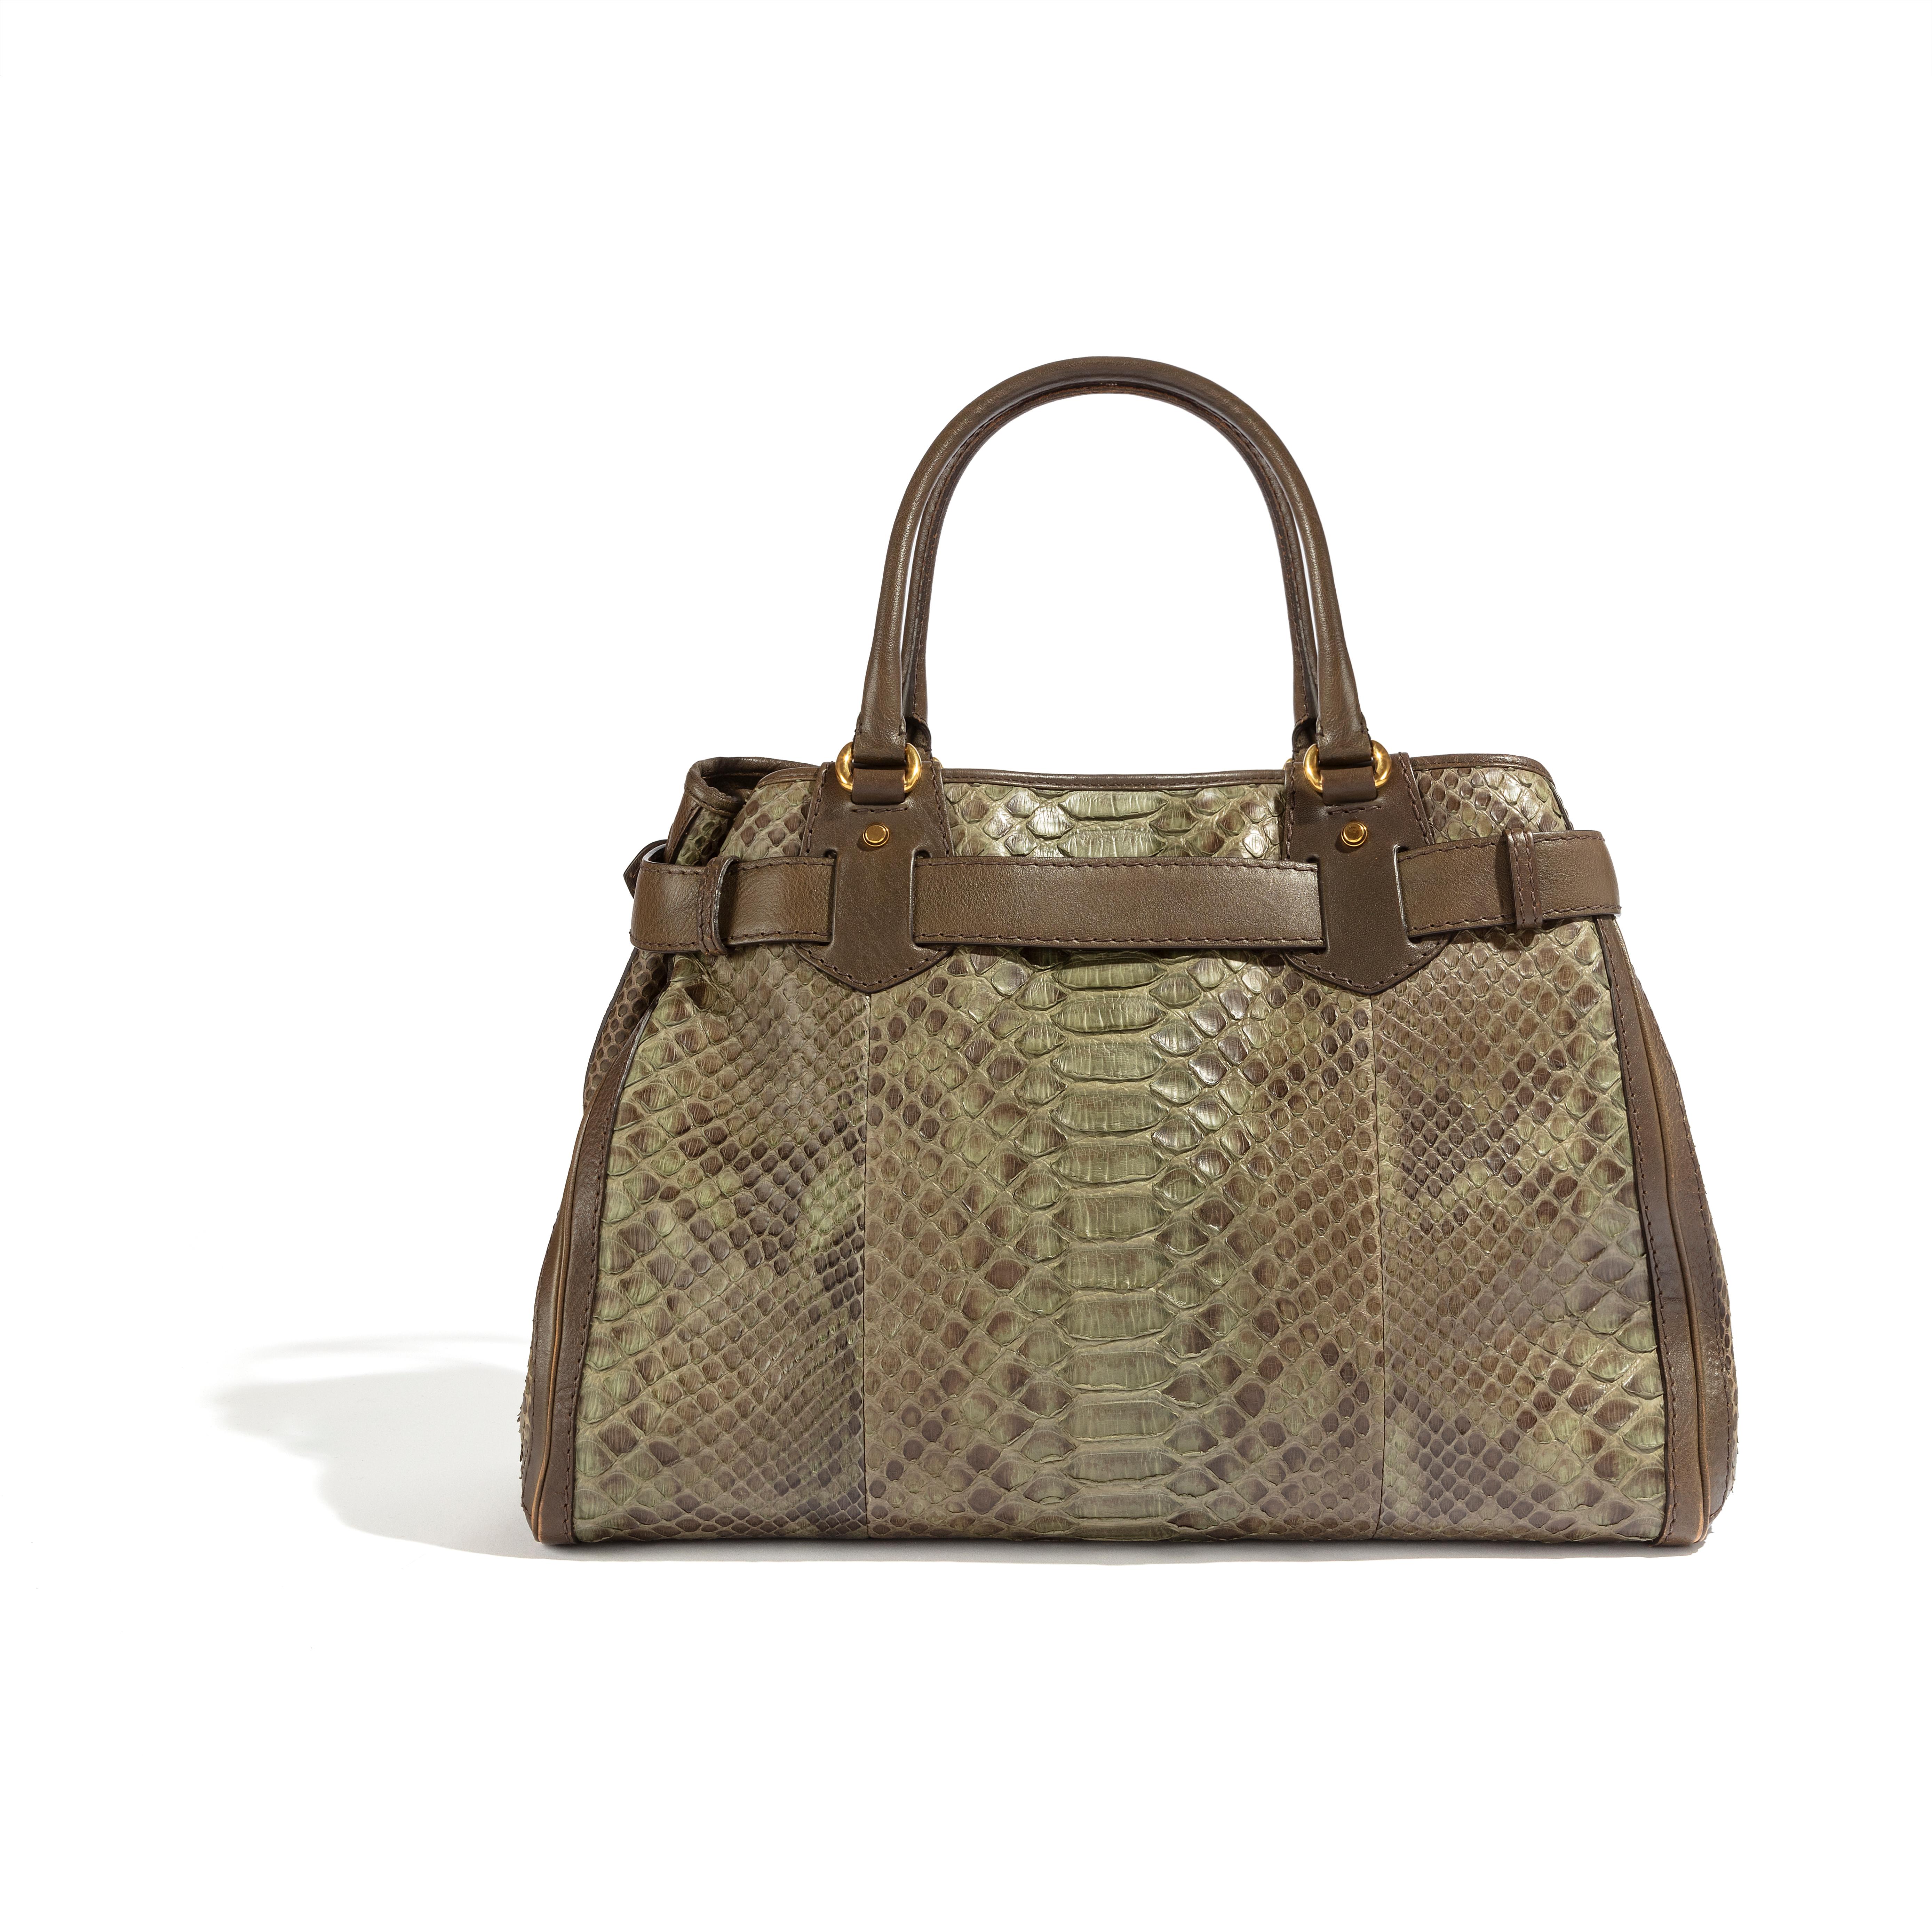 The GG Running Handbag, expertly crafted by Gucci, offers a luxurious and unique accessory to elevate any outfit. Designed with exotic leather, this handbag boasts a distinctive appearance. While the markings on the inside may differ and there may